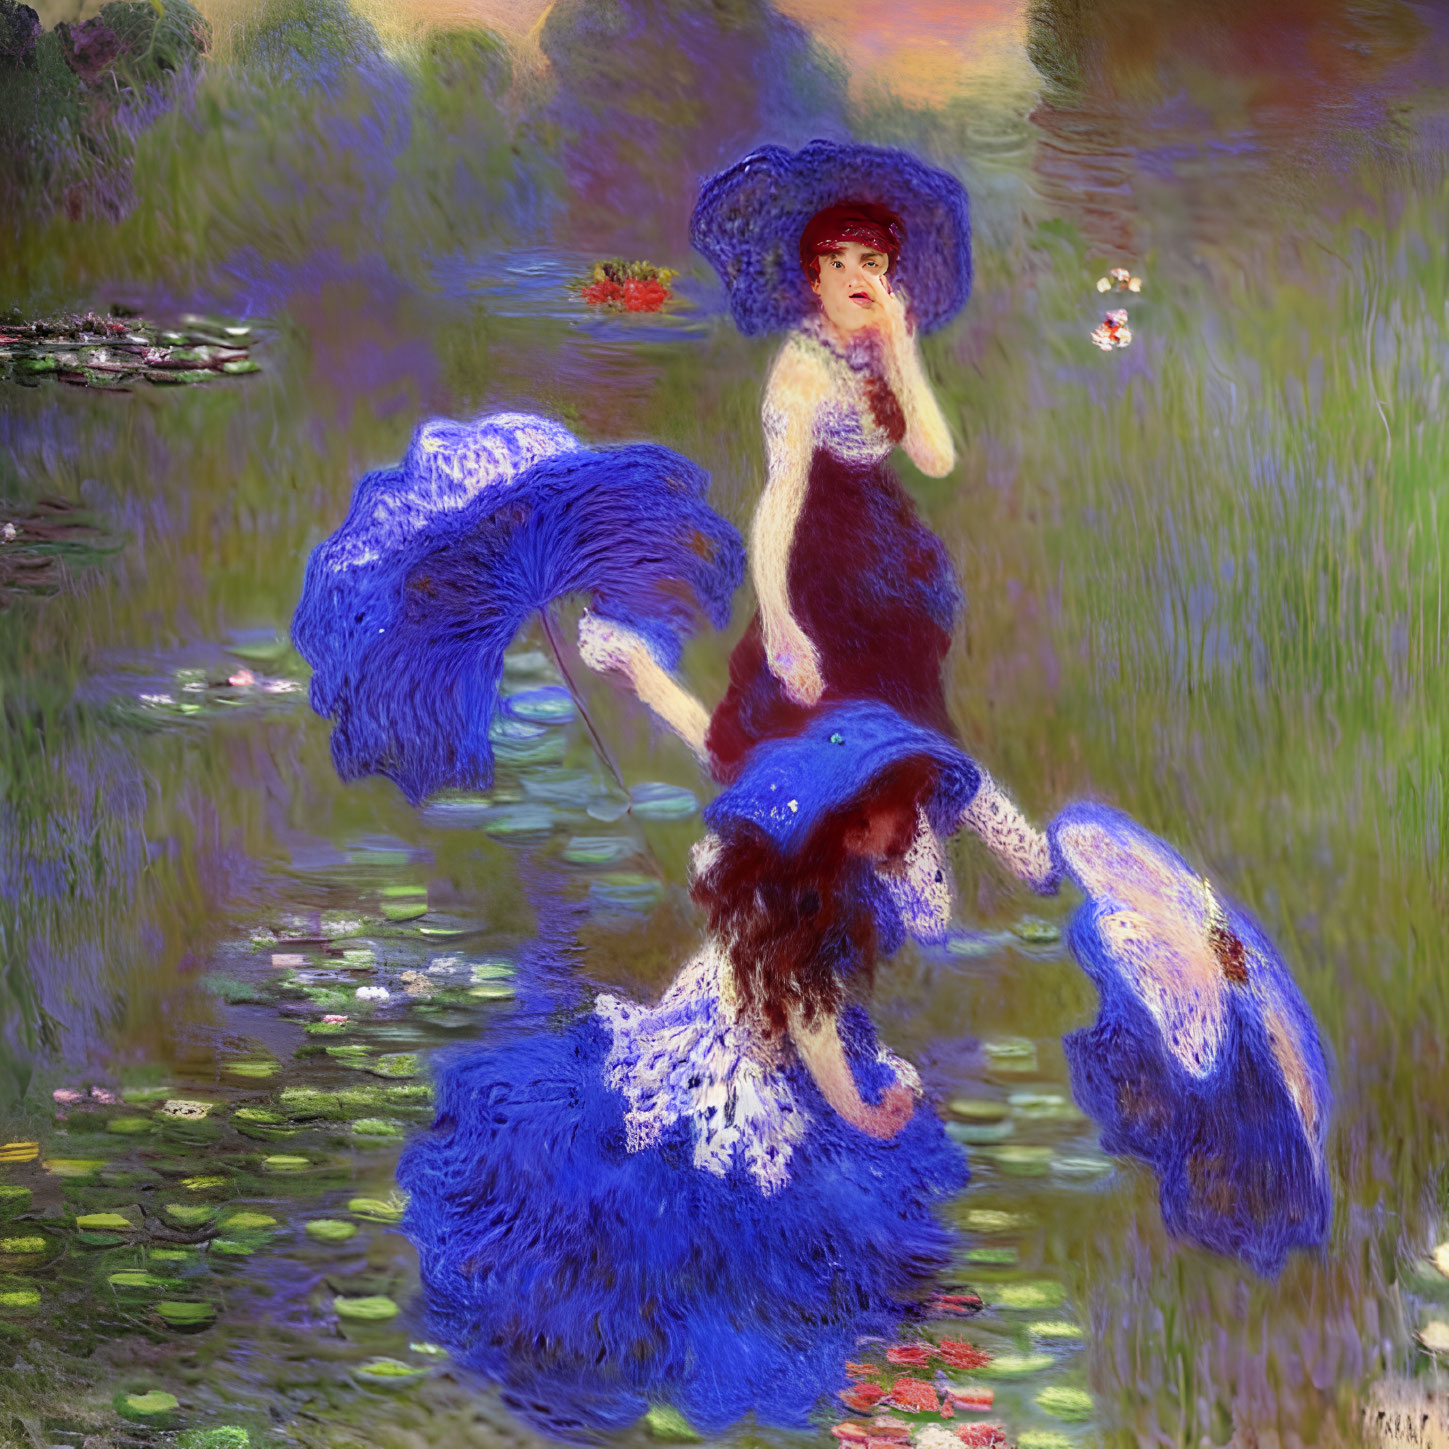 Impressionist-style painting of two women with blue parasols by a pond with water lilies